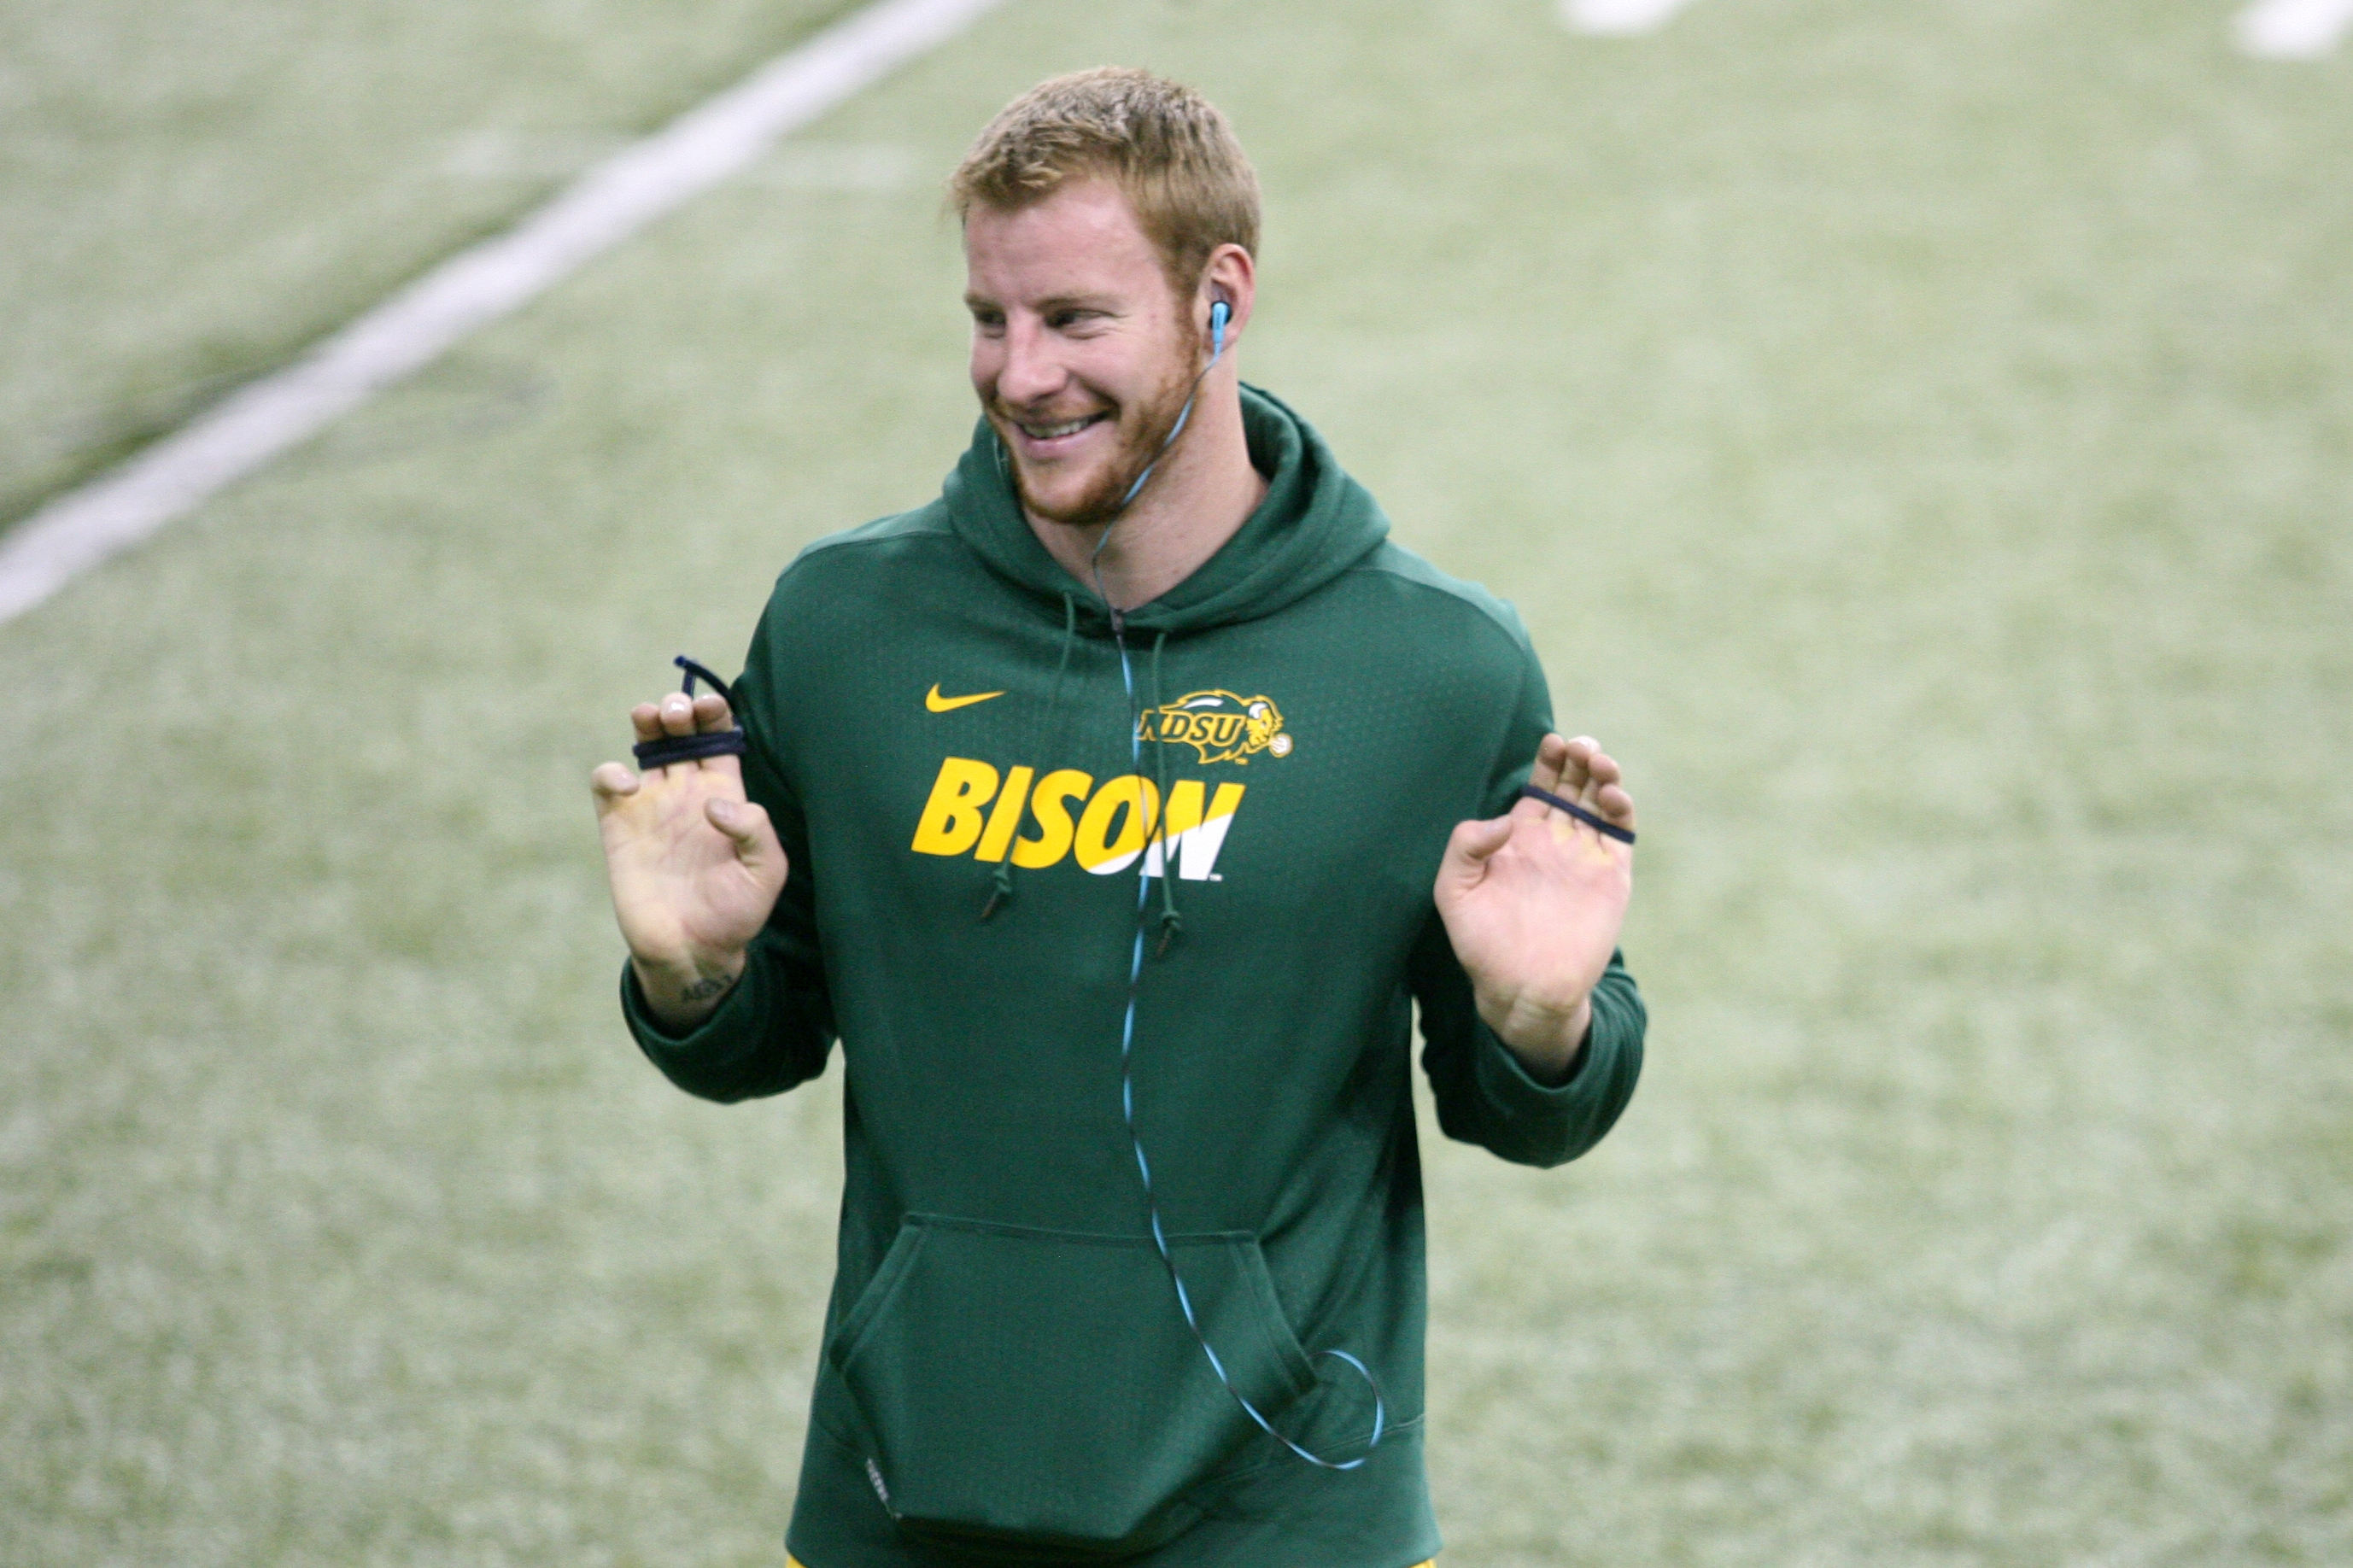 North Dakota State quarterback Carson Wentz is seen during the school's NFL football pro day, Thursday, March 24, 2016, in Fargo, N.D. (AP Photo/Bruce Crummy)